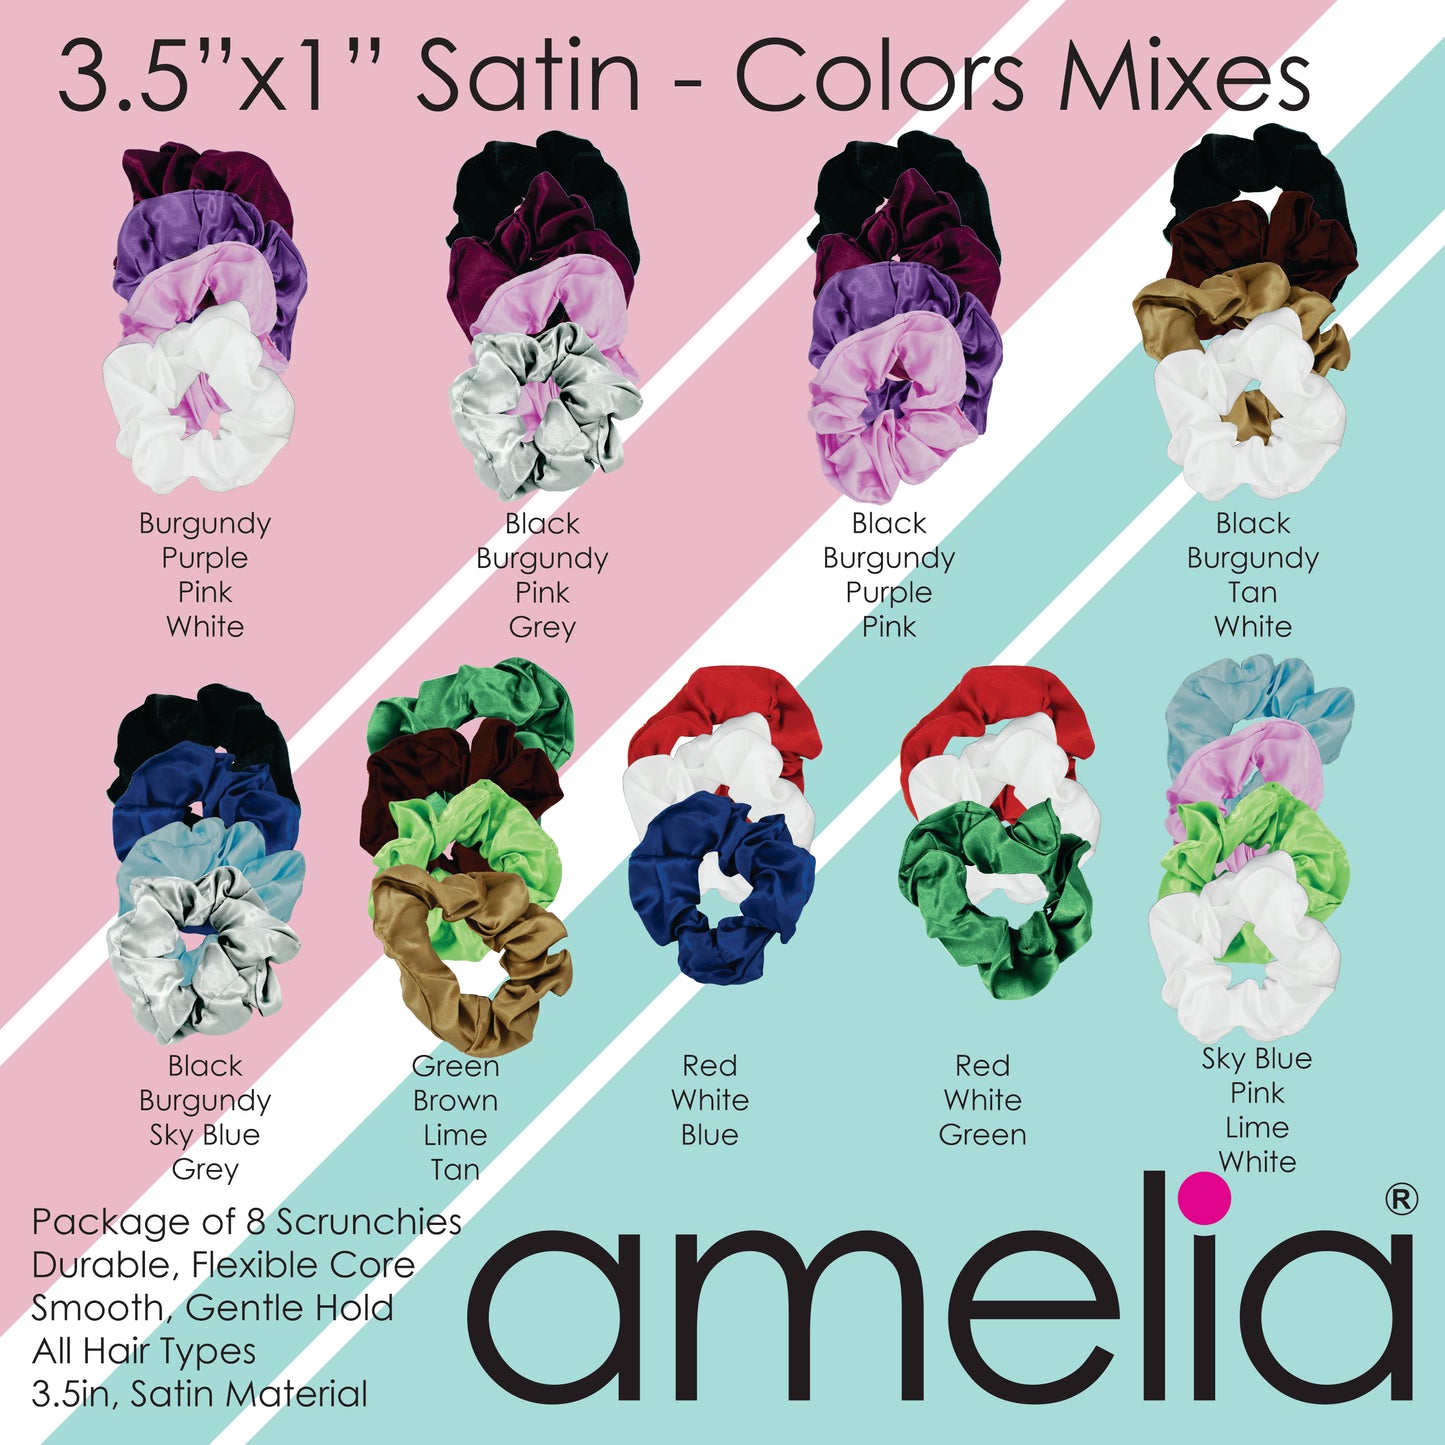 Amelia Beauty Products, Lime Satin Scrunchies, 3.5in Diameter, Gentle on Hair, Strong Hold, No Snag, No Dents or Creases. 8 Pack